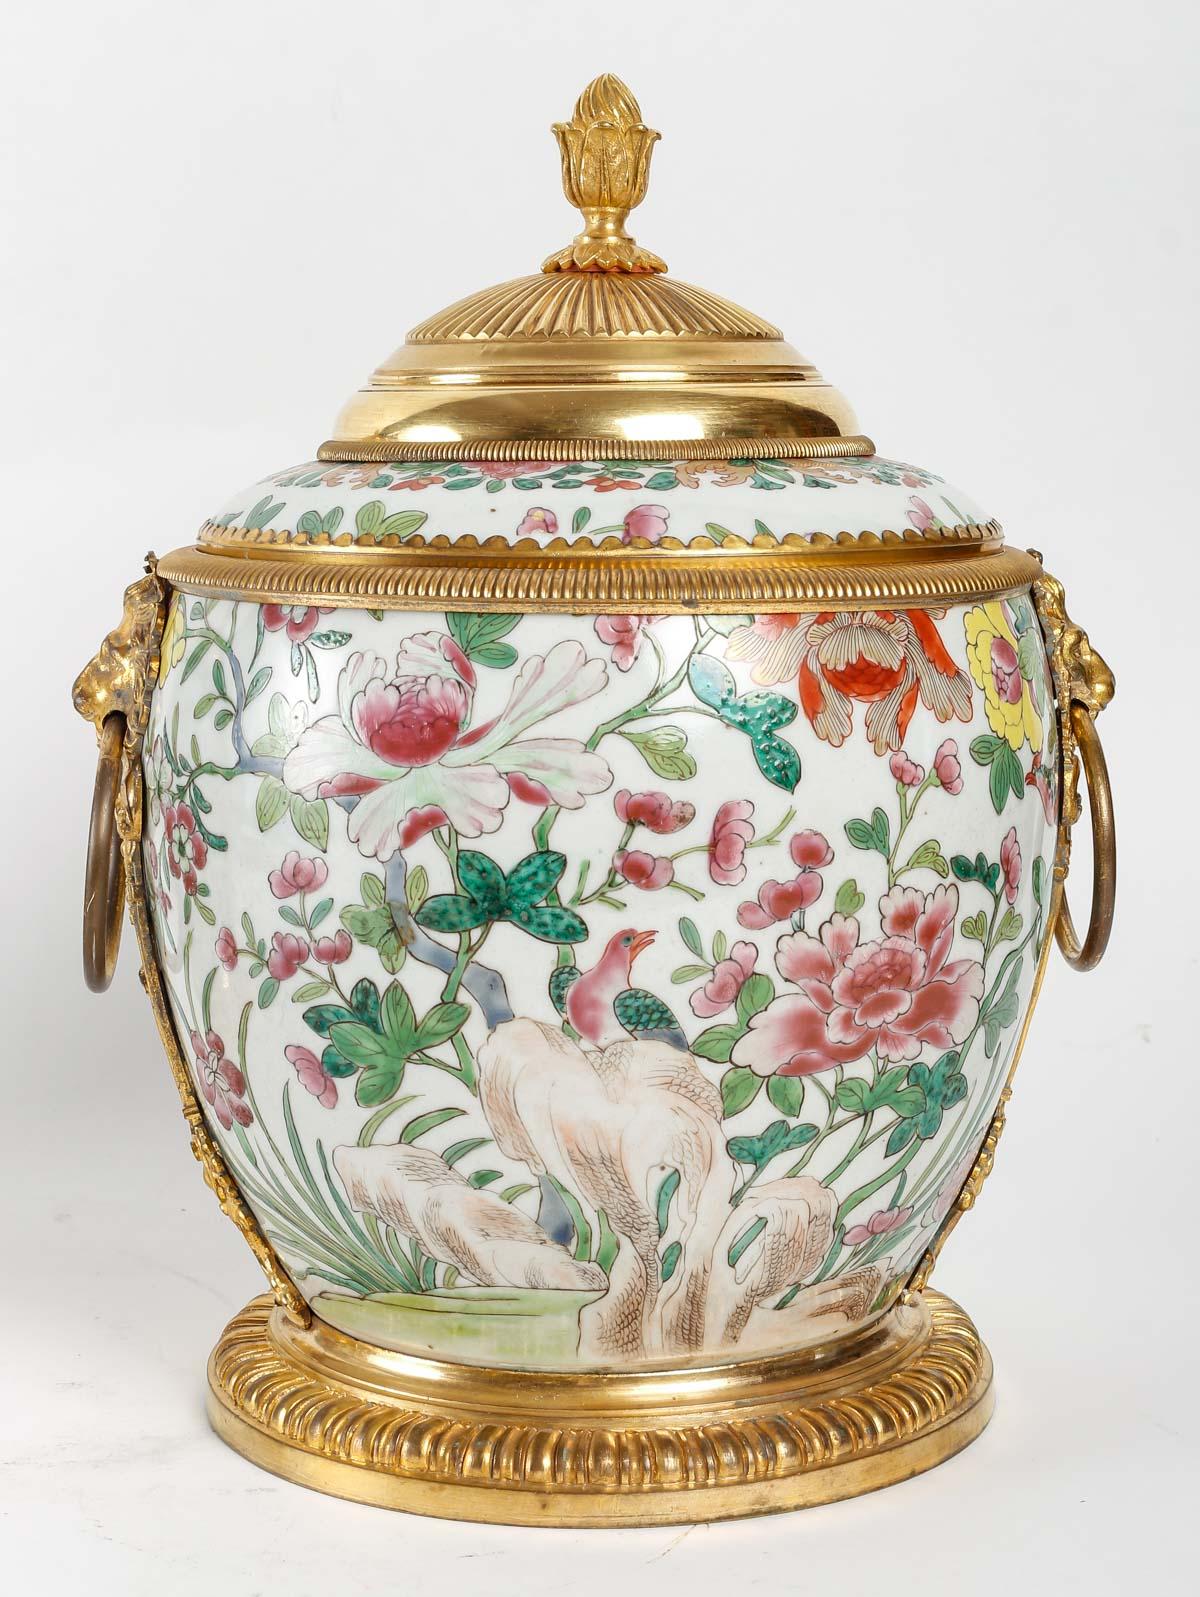 Louis XIV  A French Regence Style Ormolu-Mounted Chinese Porcelain Pair of Ginger Jar